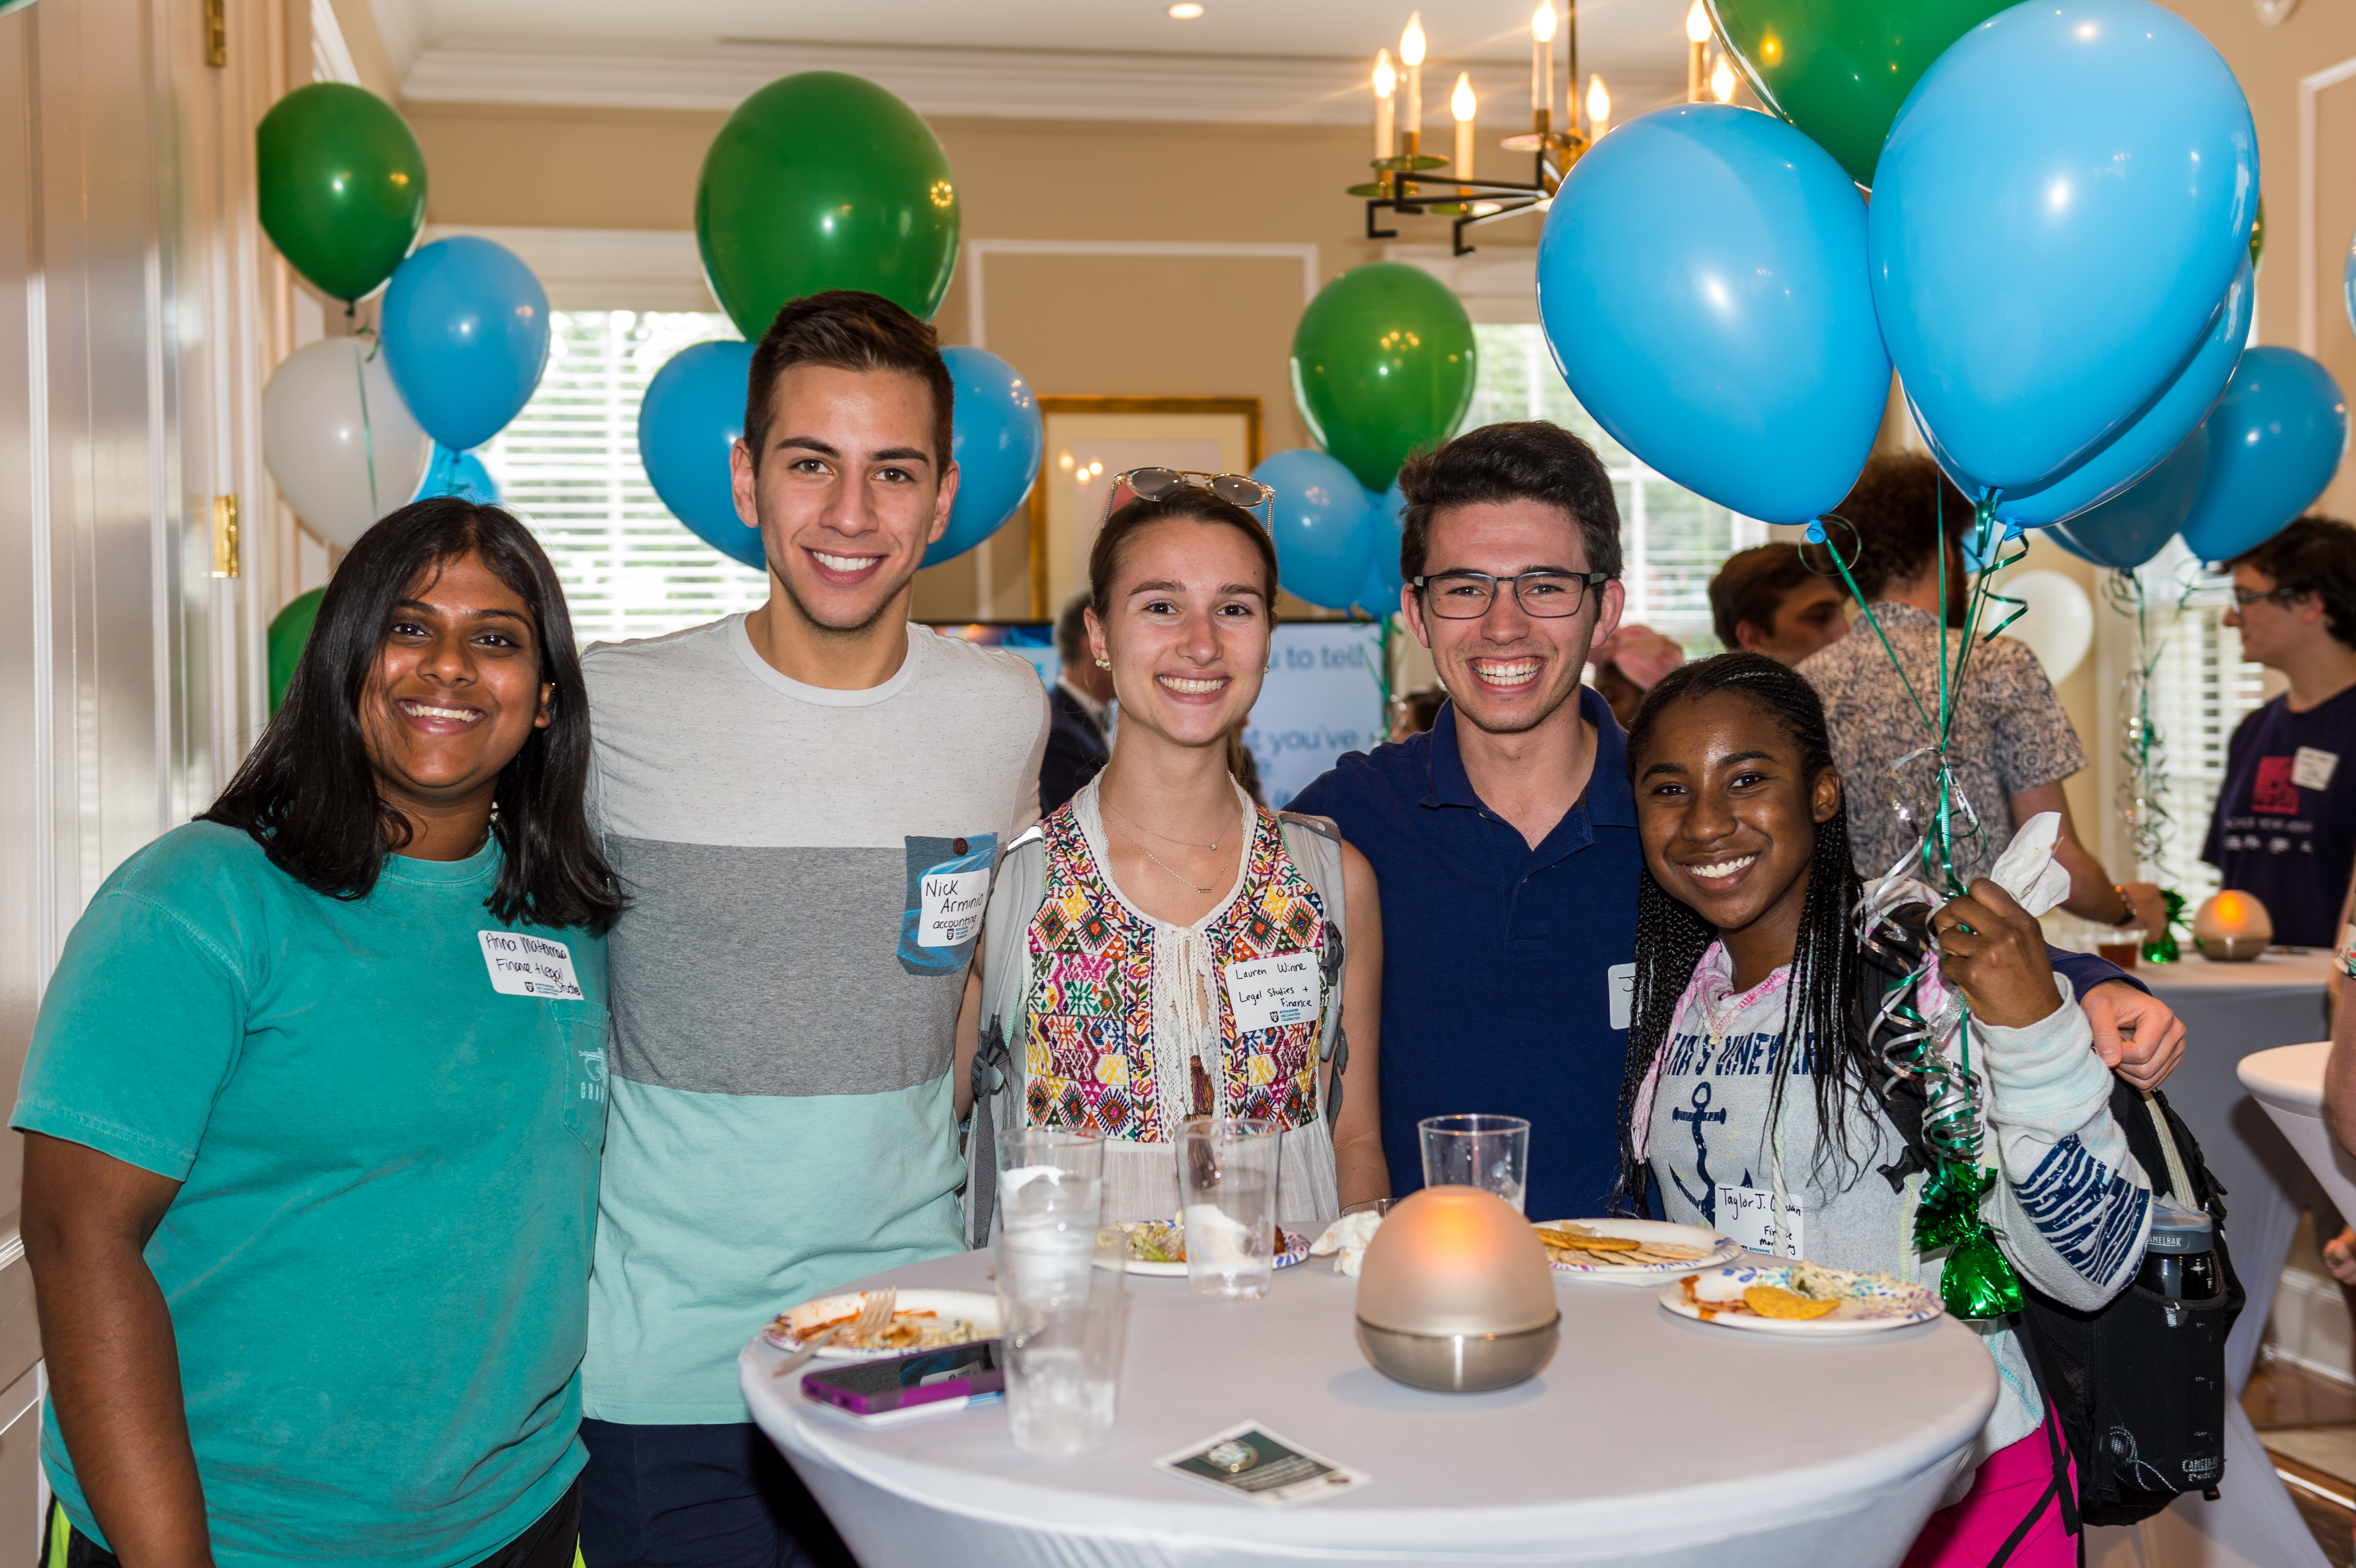 Scenes from the 2018 Sophomore Declaration Celebration held for the future Class of 2020 in the Bea Field Alumni House, April 12, 2018. Sophomores received their first piece of academic regalia and networked with alumni and university leadership.